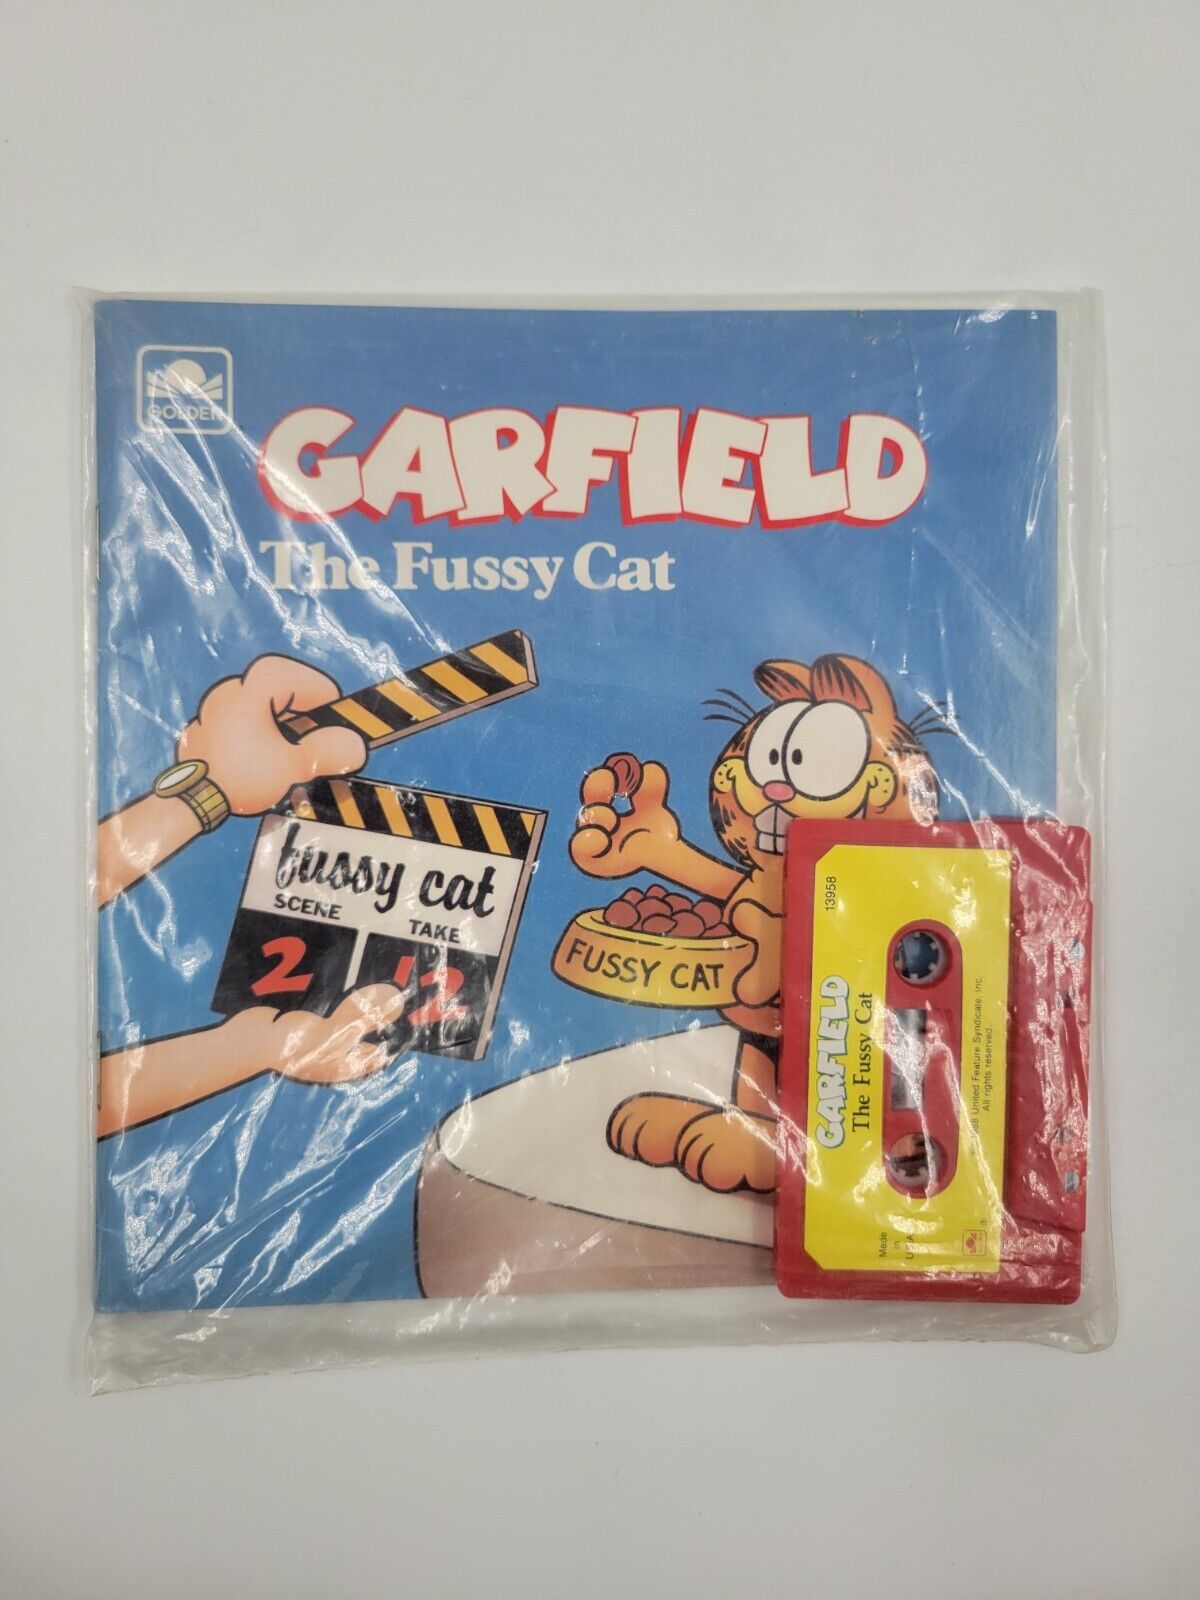 Garfield The Fussy Cat and Cassette Tape  Vintage 1988